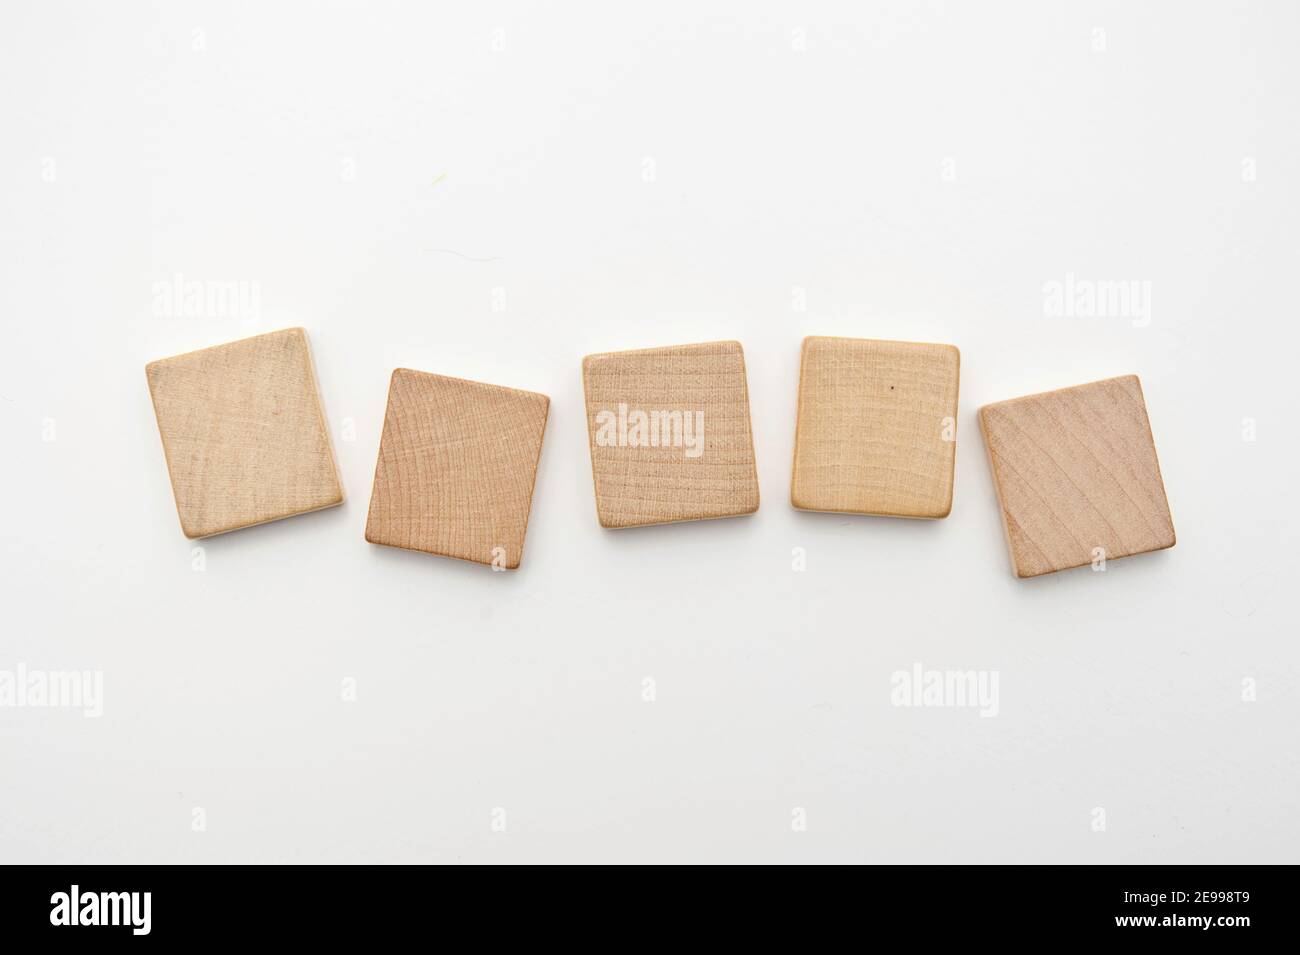 five blank wooden tiles isolated Stock Photo